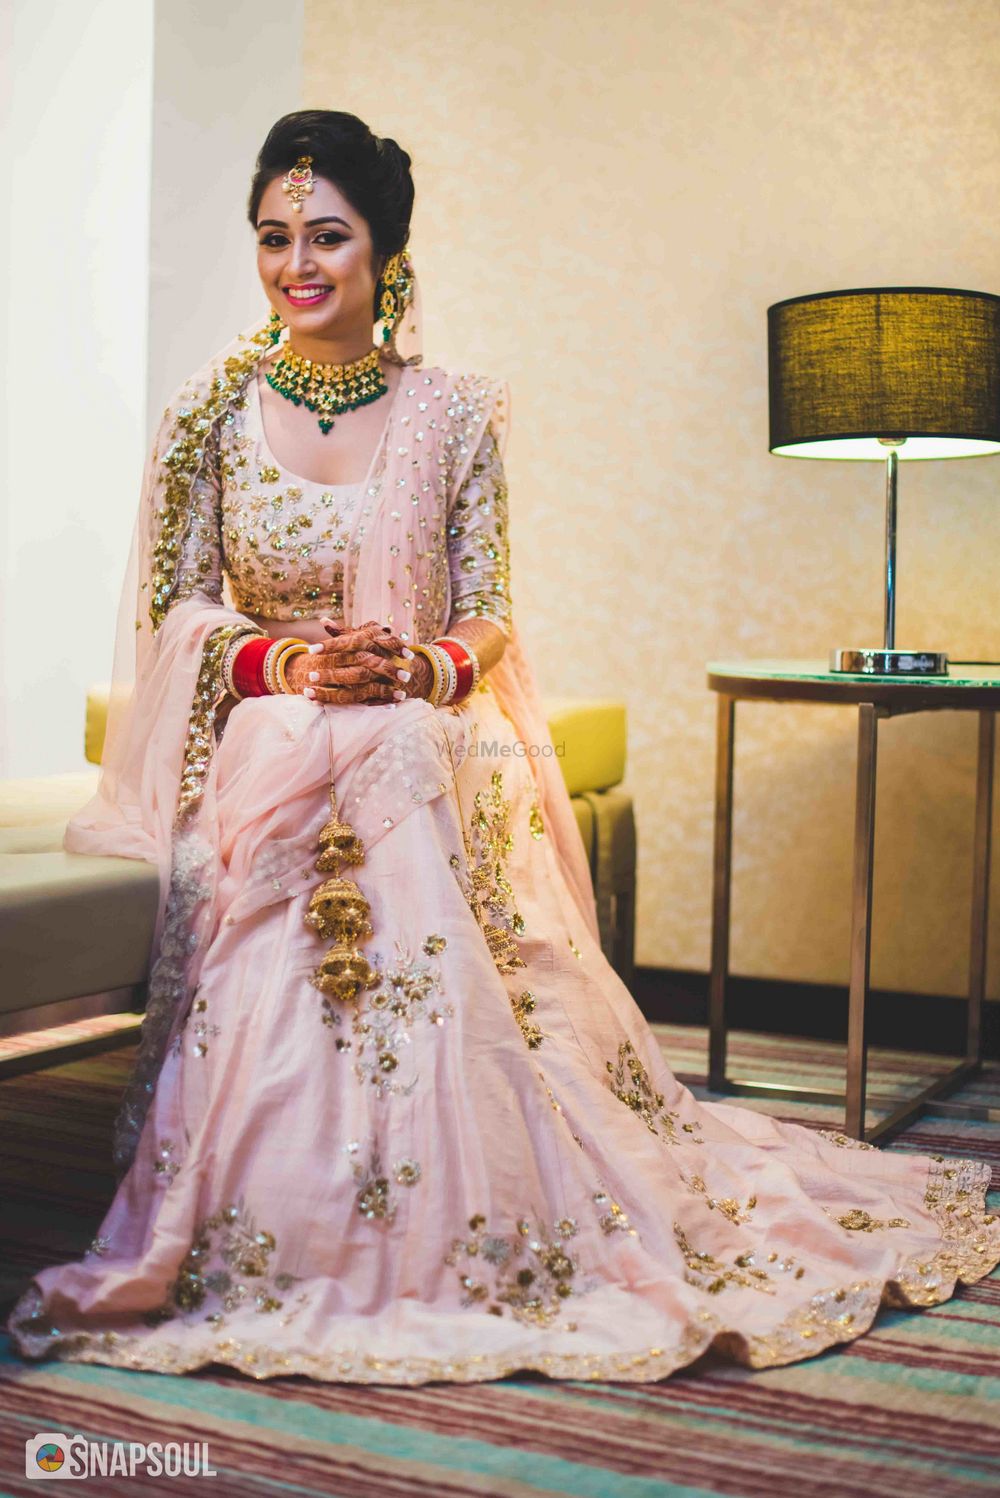 Photo of Pastel bridal lehenga in pink with green jewellery